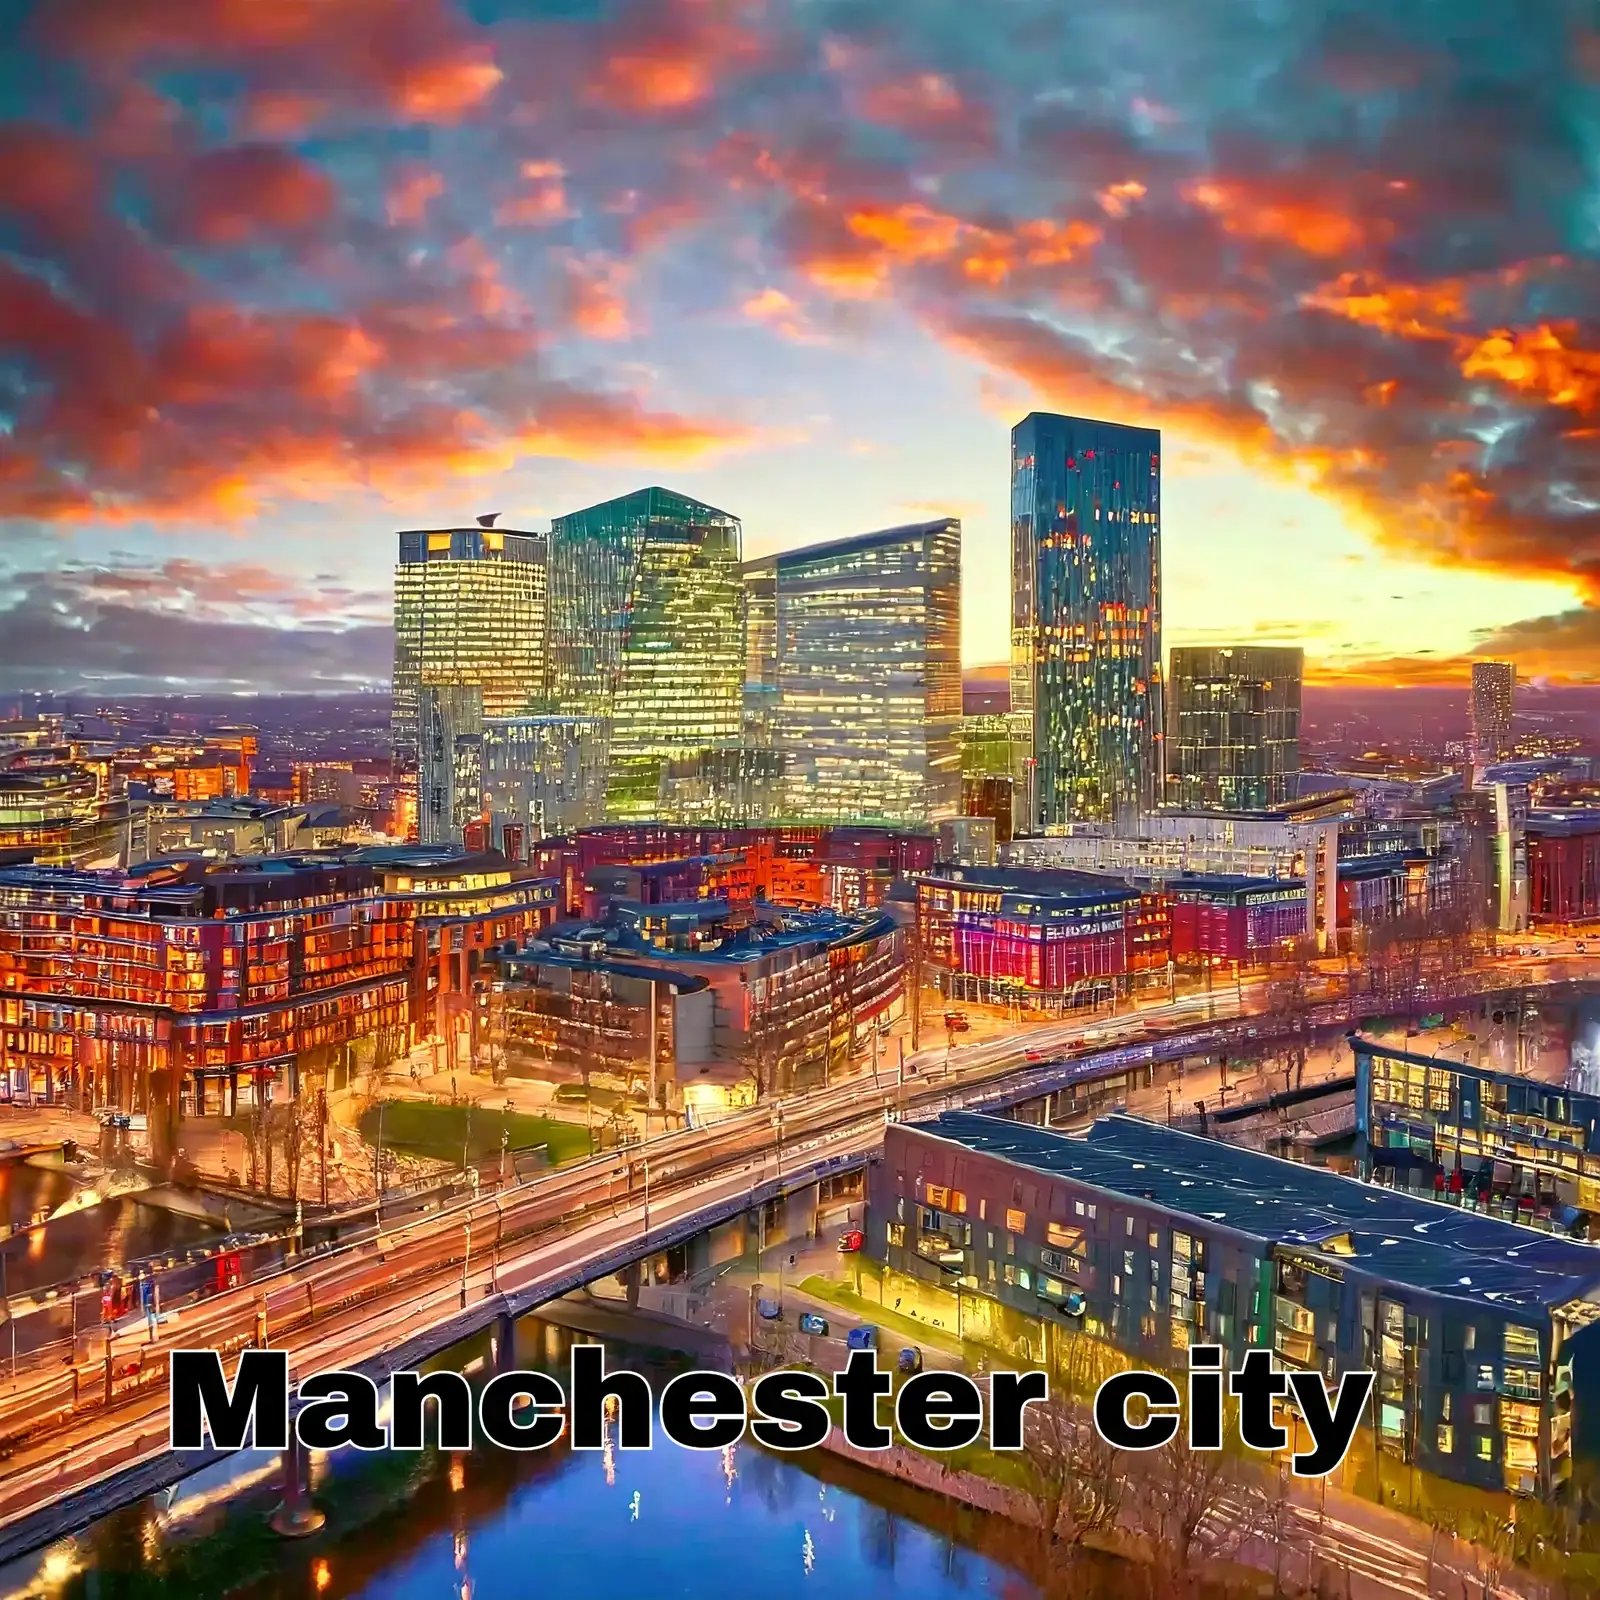 Sunset view of Manchester city skyline with illuminated buildings and dramatic clouds.